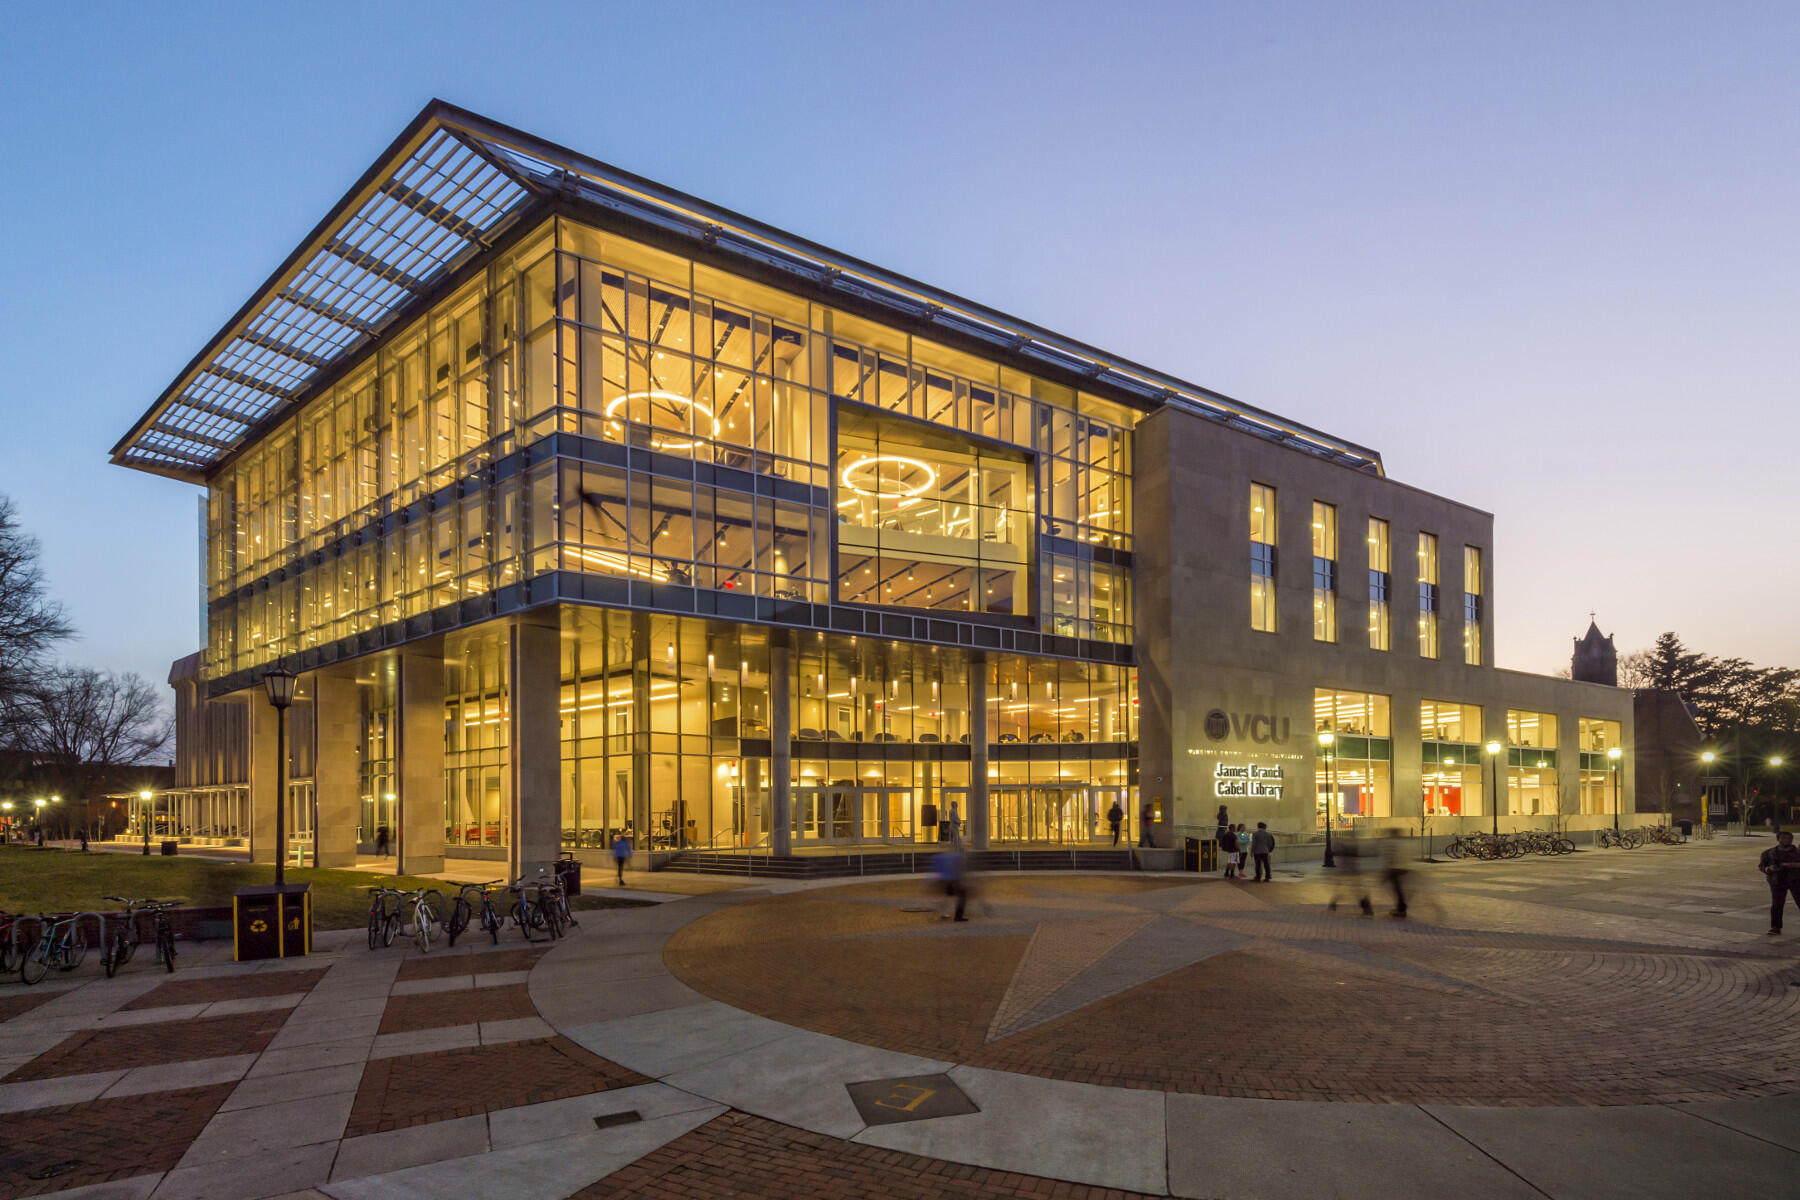 VCU Libraries are home to more than 3 million books, videos, articles and artifacts. (Photo by Allen Jones, University Relations)